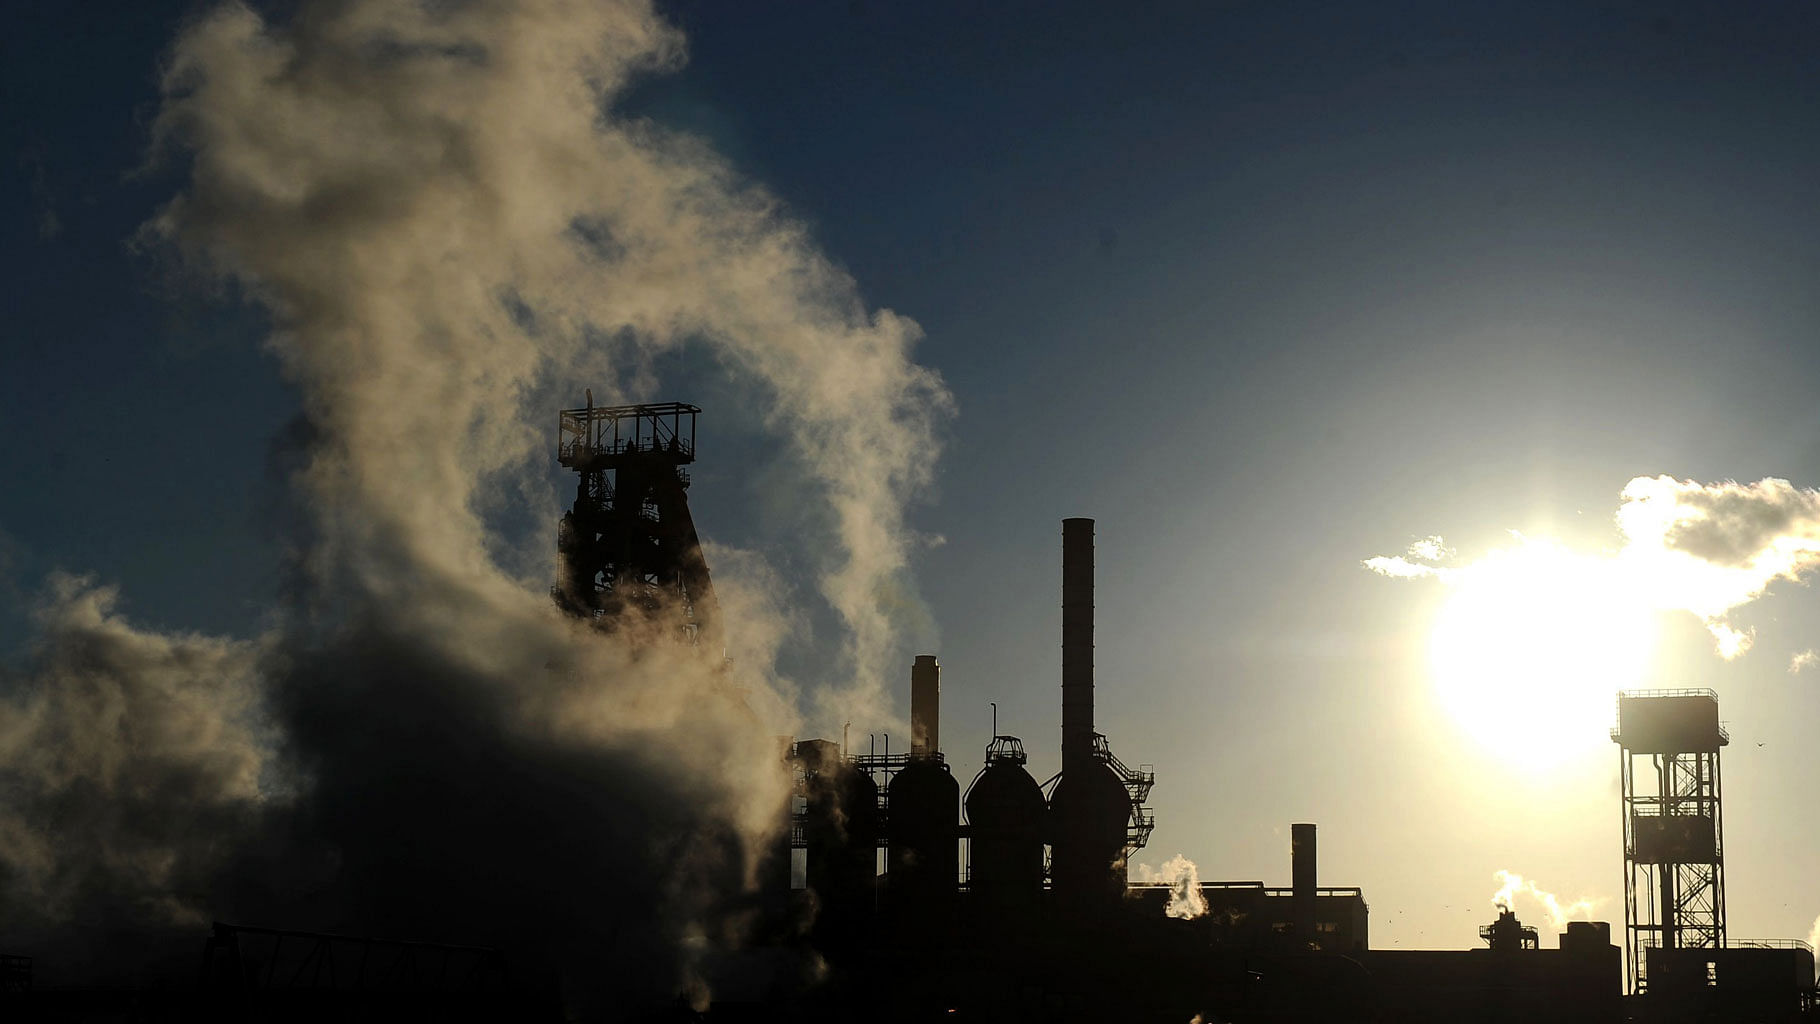 The sun sets as smoke and steam rises from the Tata steel plant in Port Talbot, Wales. (Photo: AP)